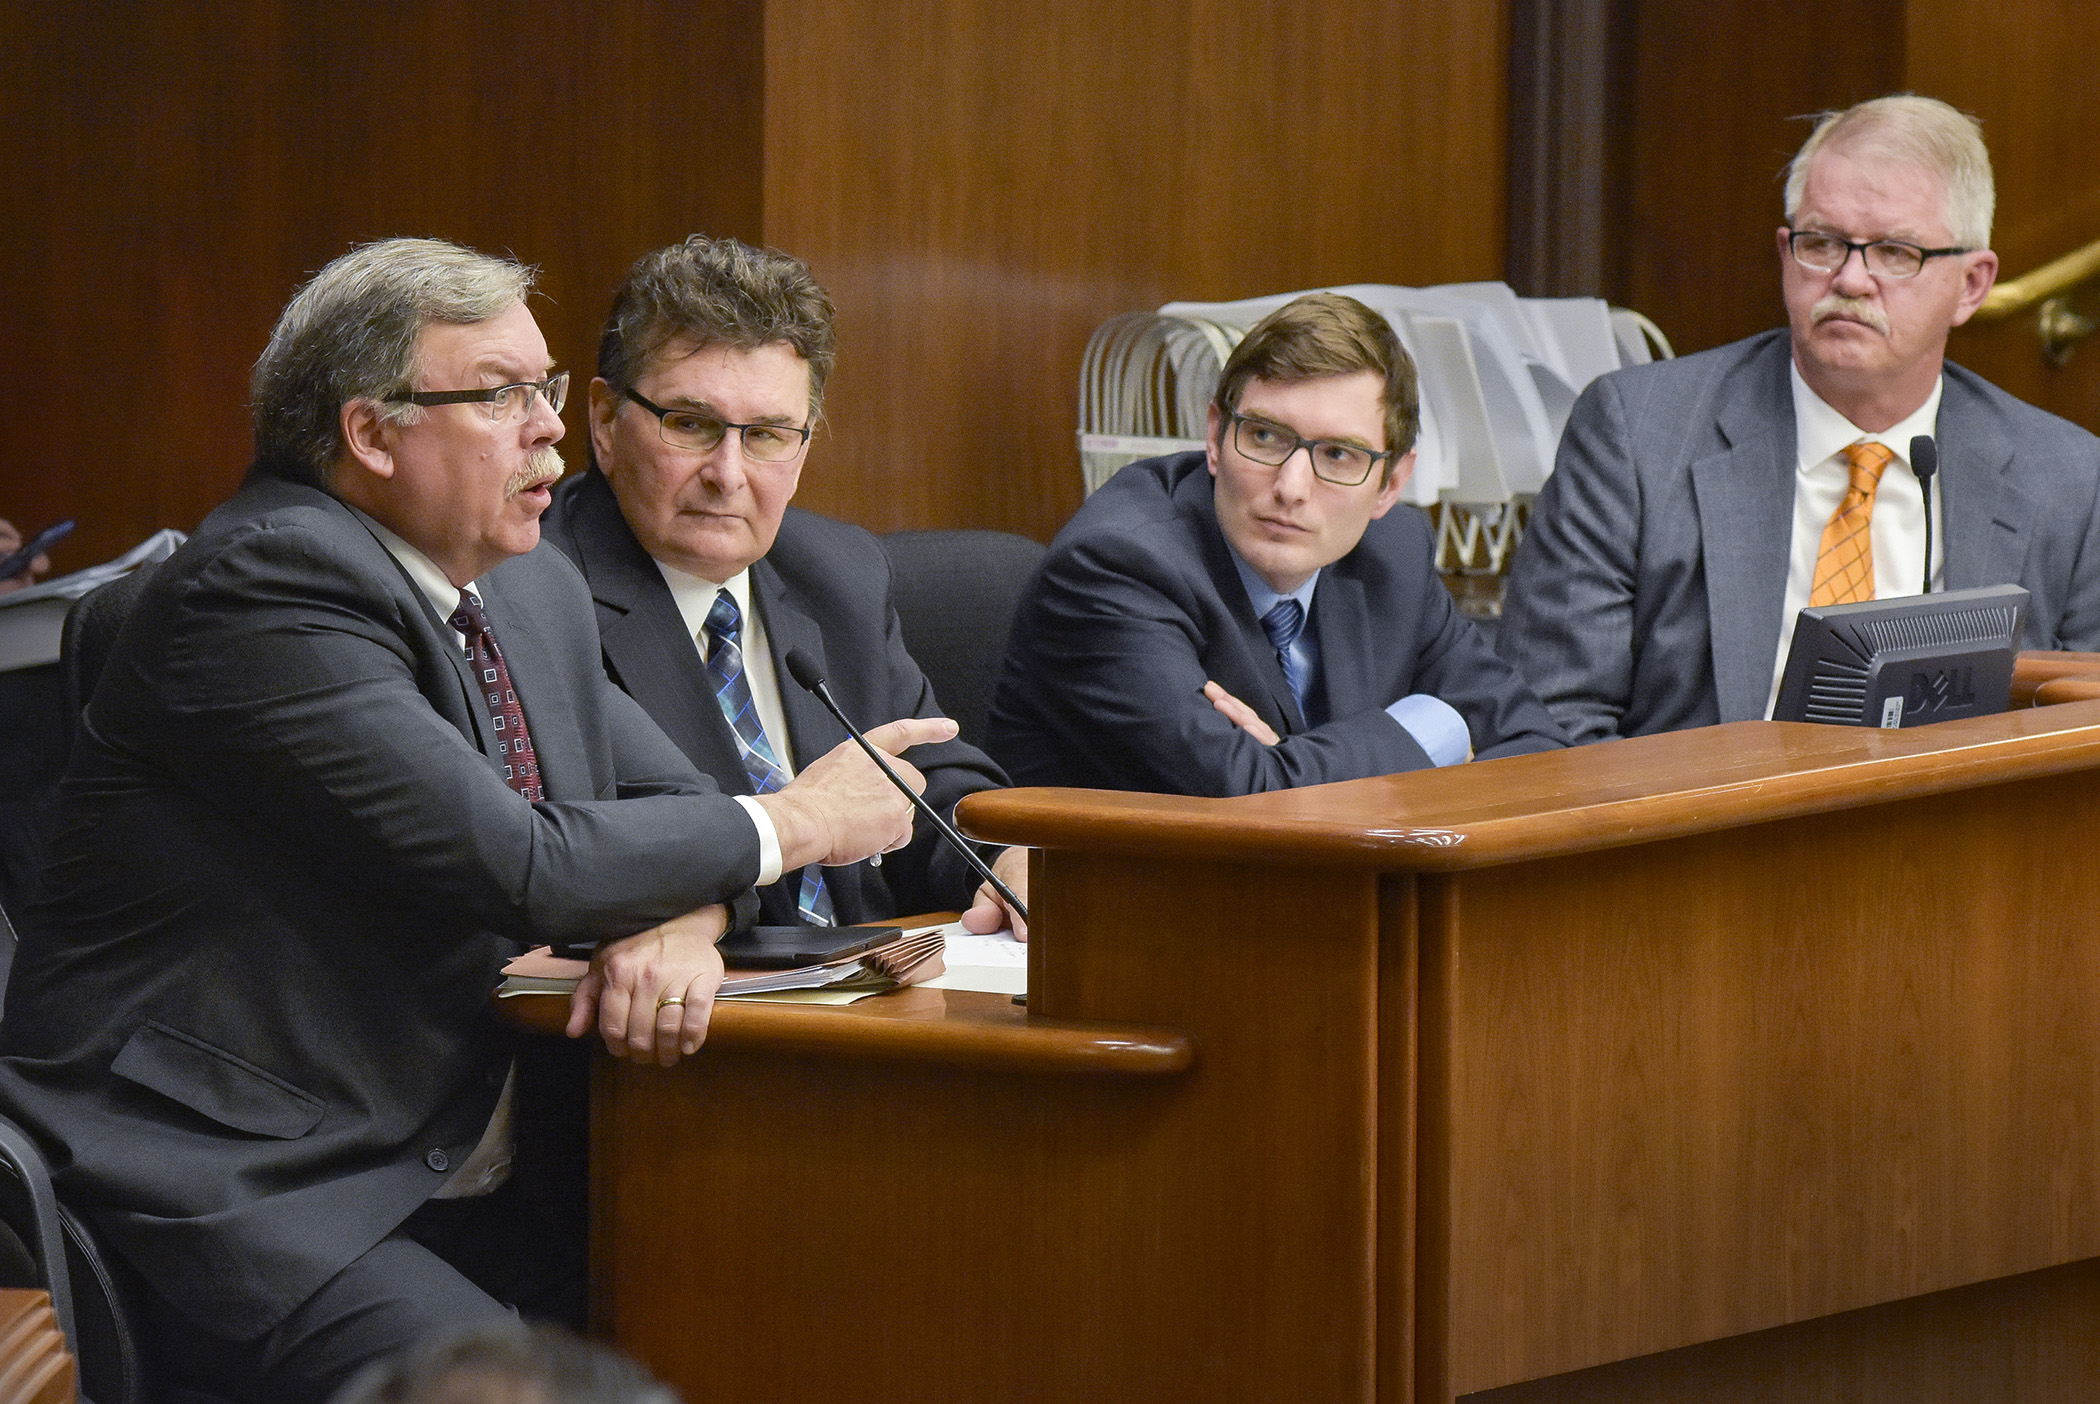 Mark Phillips, commissioner of the Iron Range Resources and Rehabilitation Board, from left, Rep. Tom Anzelc, Rep. Jason Metsa and Rep. Rob Ecklund testify before the House Government Operations and Elections Policy Committee April 20 during discussion of a bill that would, among other things, abolish the IRRRB and create a new commission. Photo by Andrew VonBank